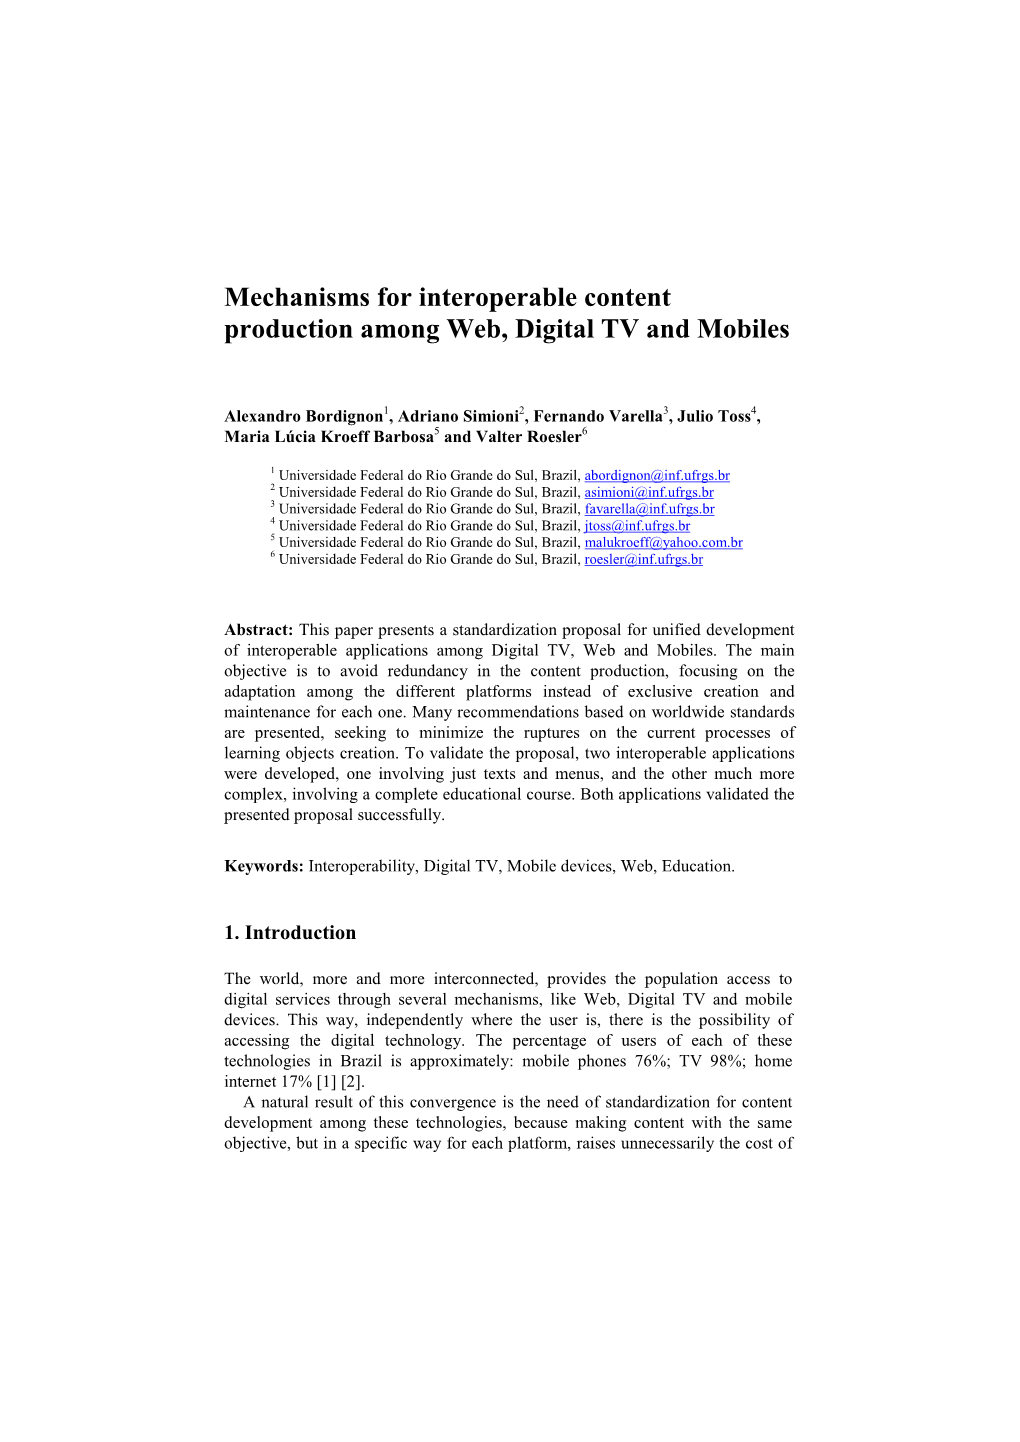 Mechanisms for Interoperable Content Production Among Web, Digital TV and Mobiles